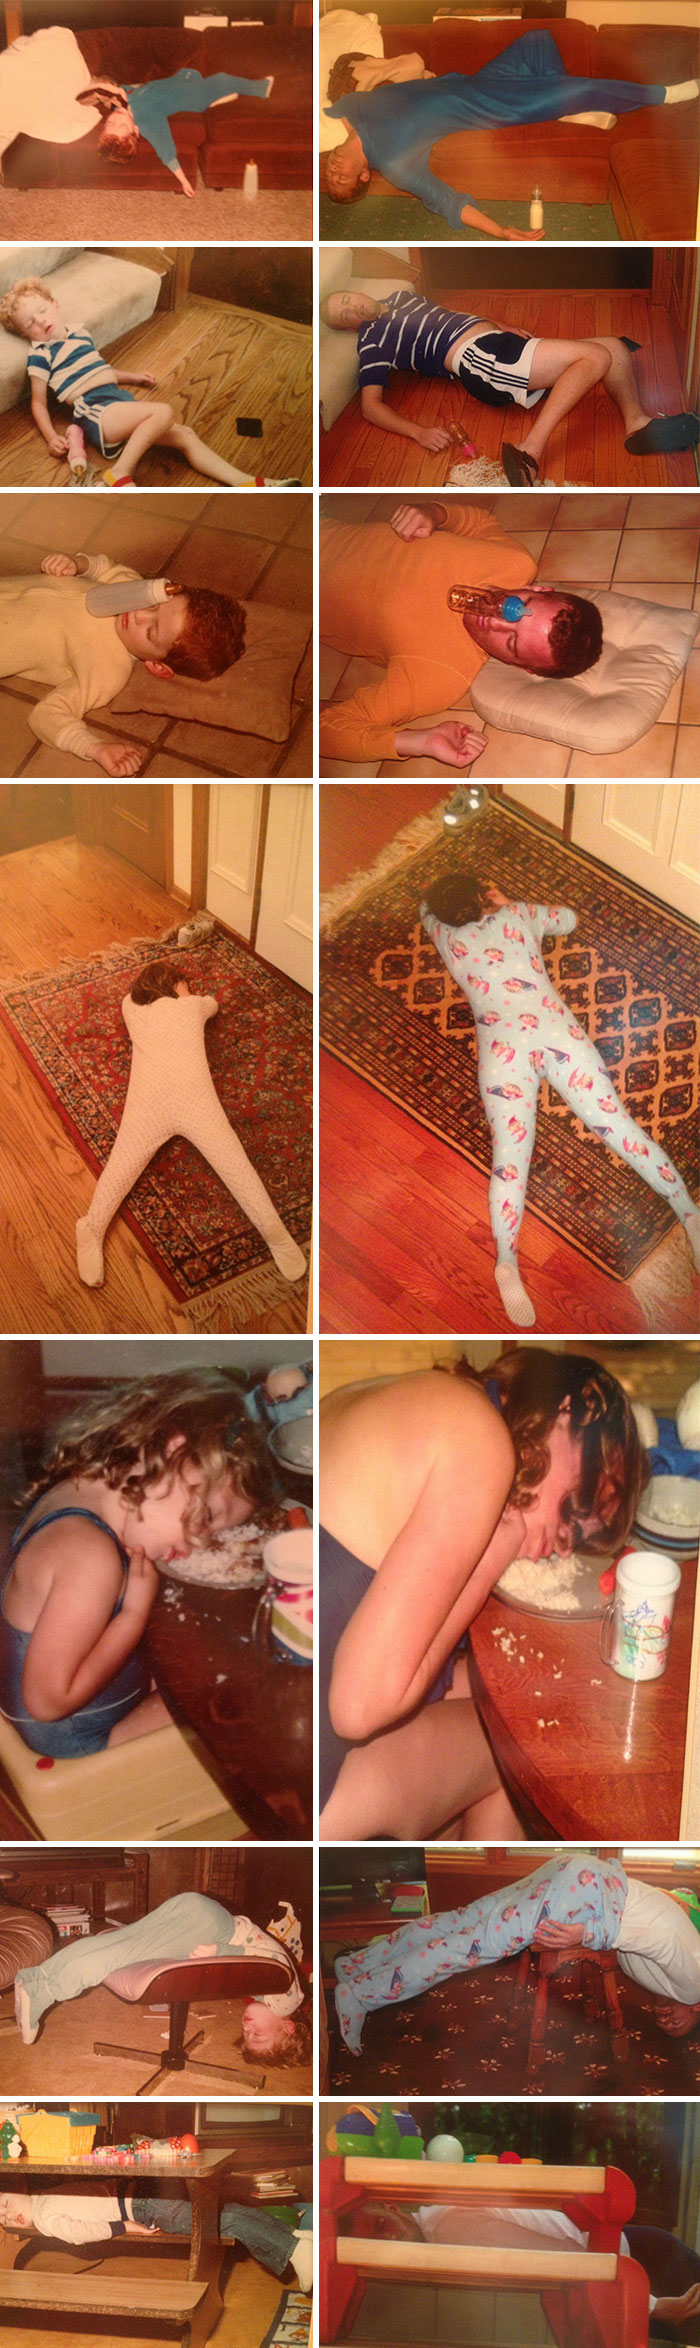 My Parents Took Pictures Of Us Asleep In Weird Positions When We Were Kids. We Recreated The Photos As Adults, But Just Look Like A Bunch Of Drunks!